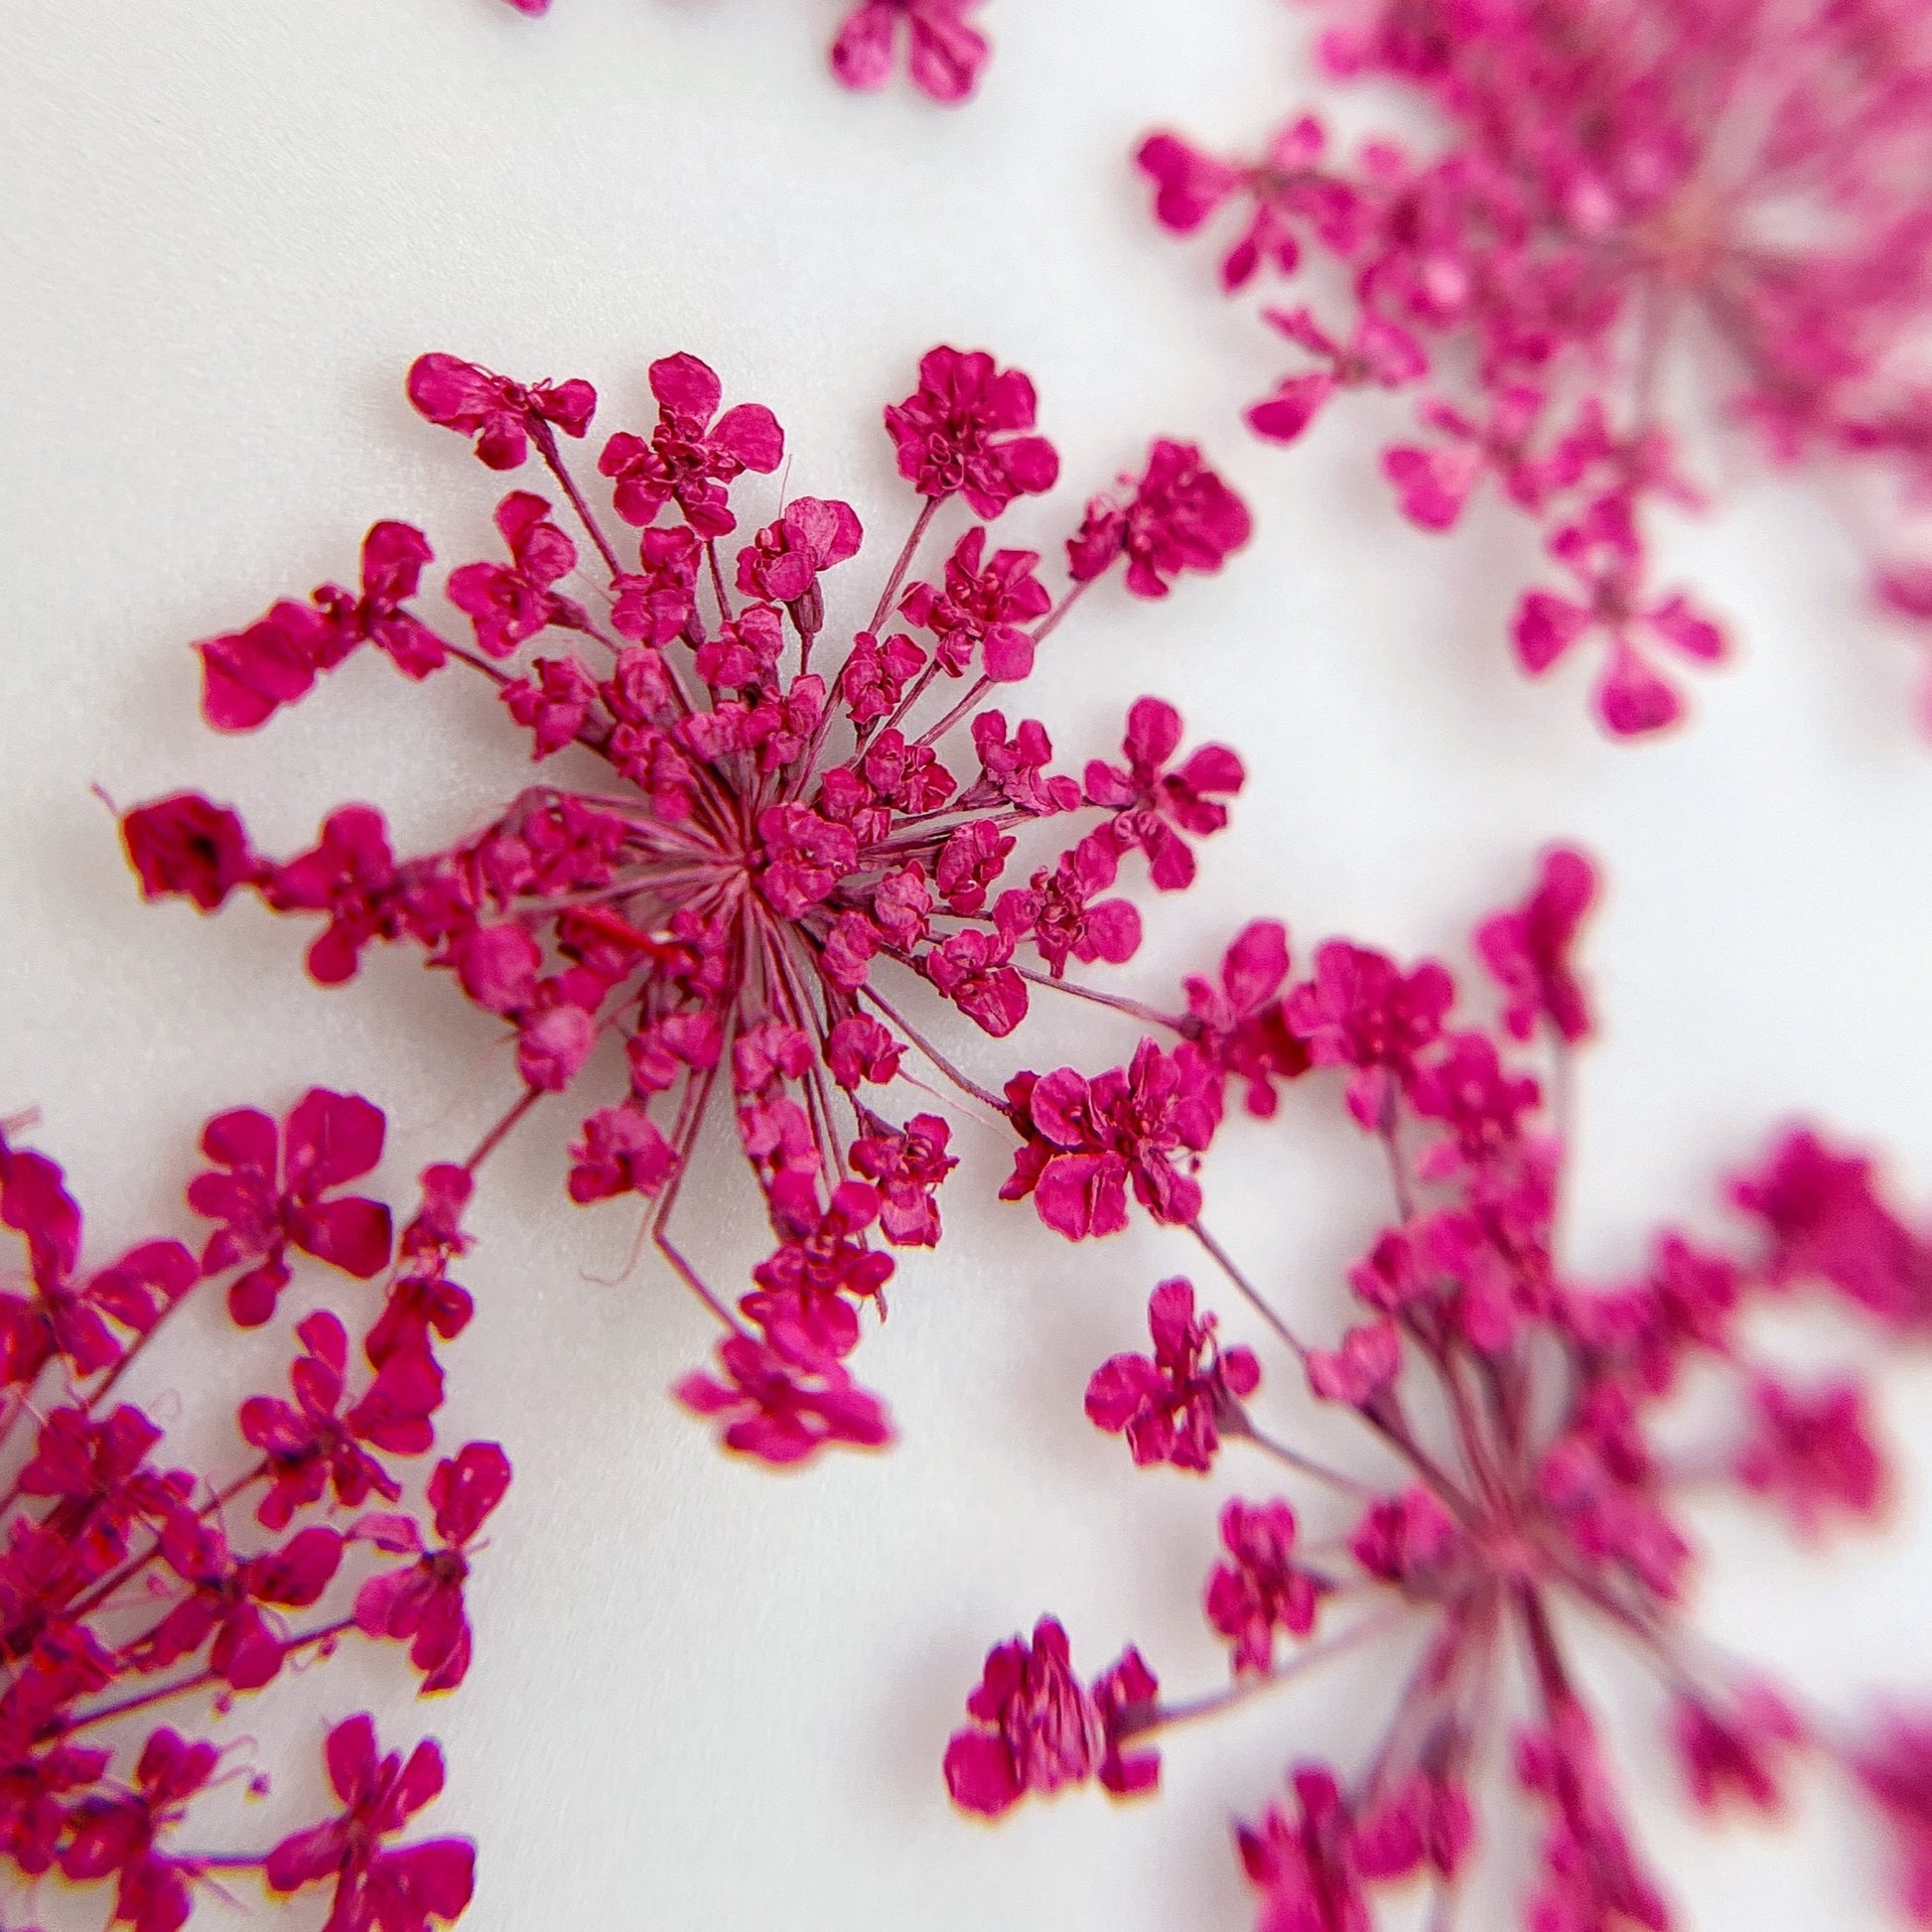 Pressed flower clusters scattered on white background. 